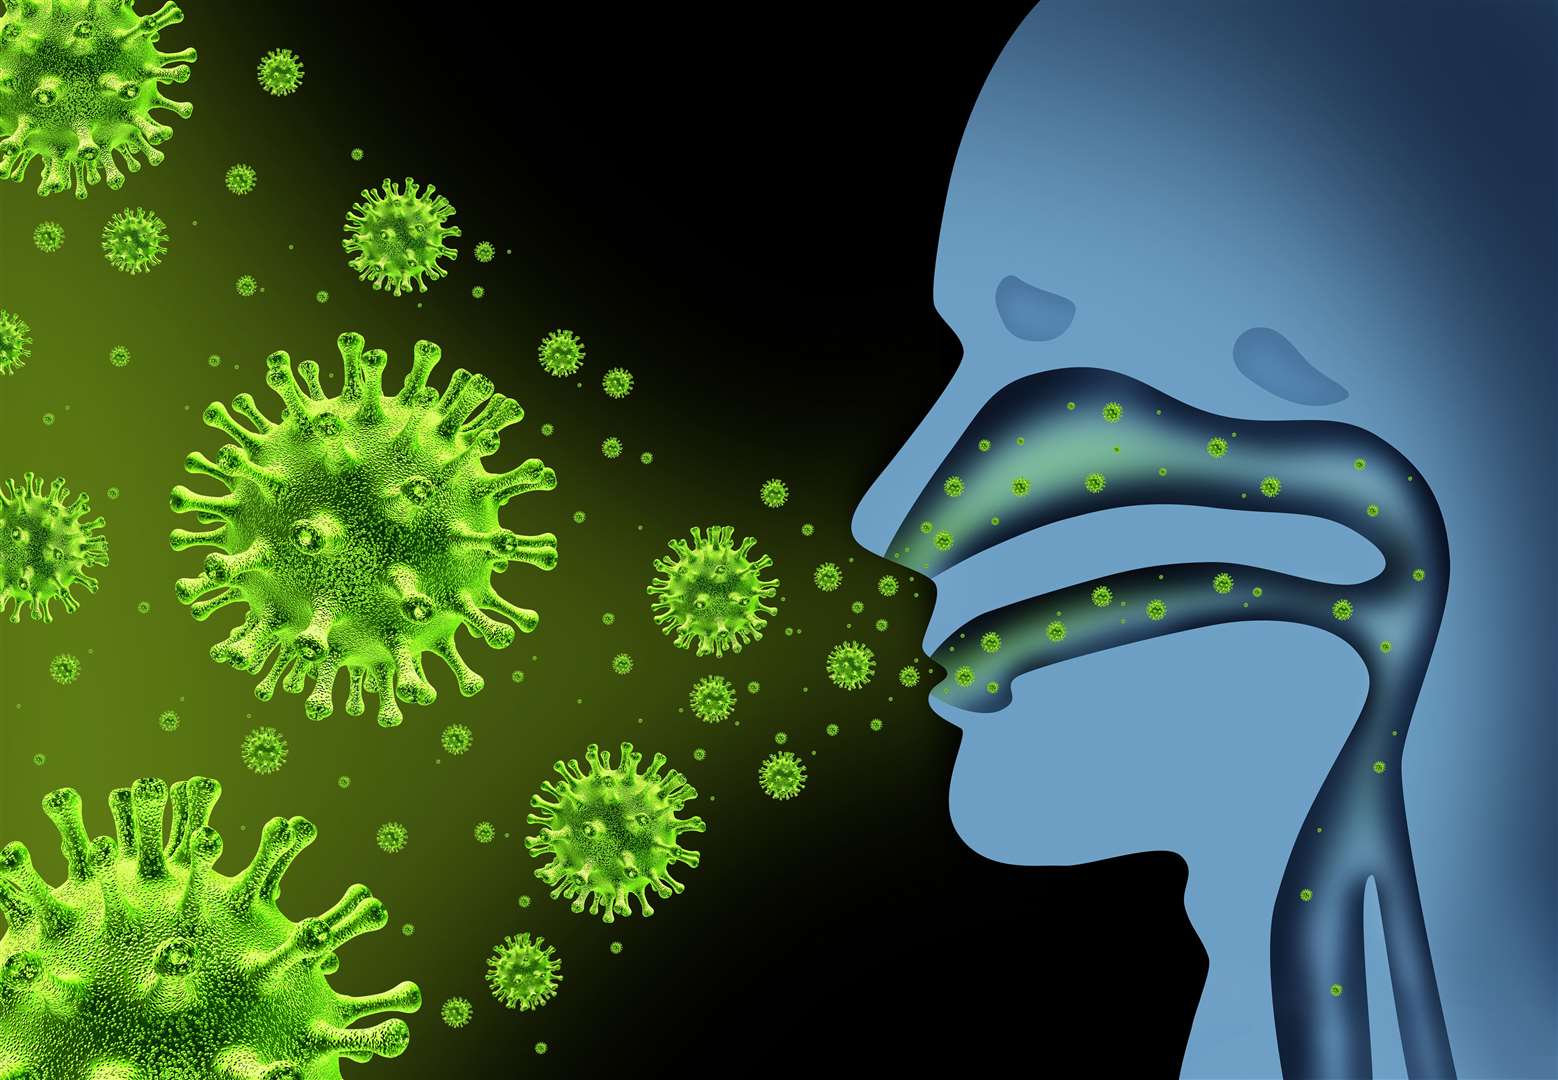 Could the tone of your voice suggest you're carrying the virus?